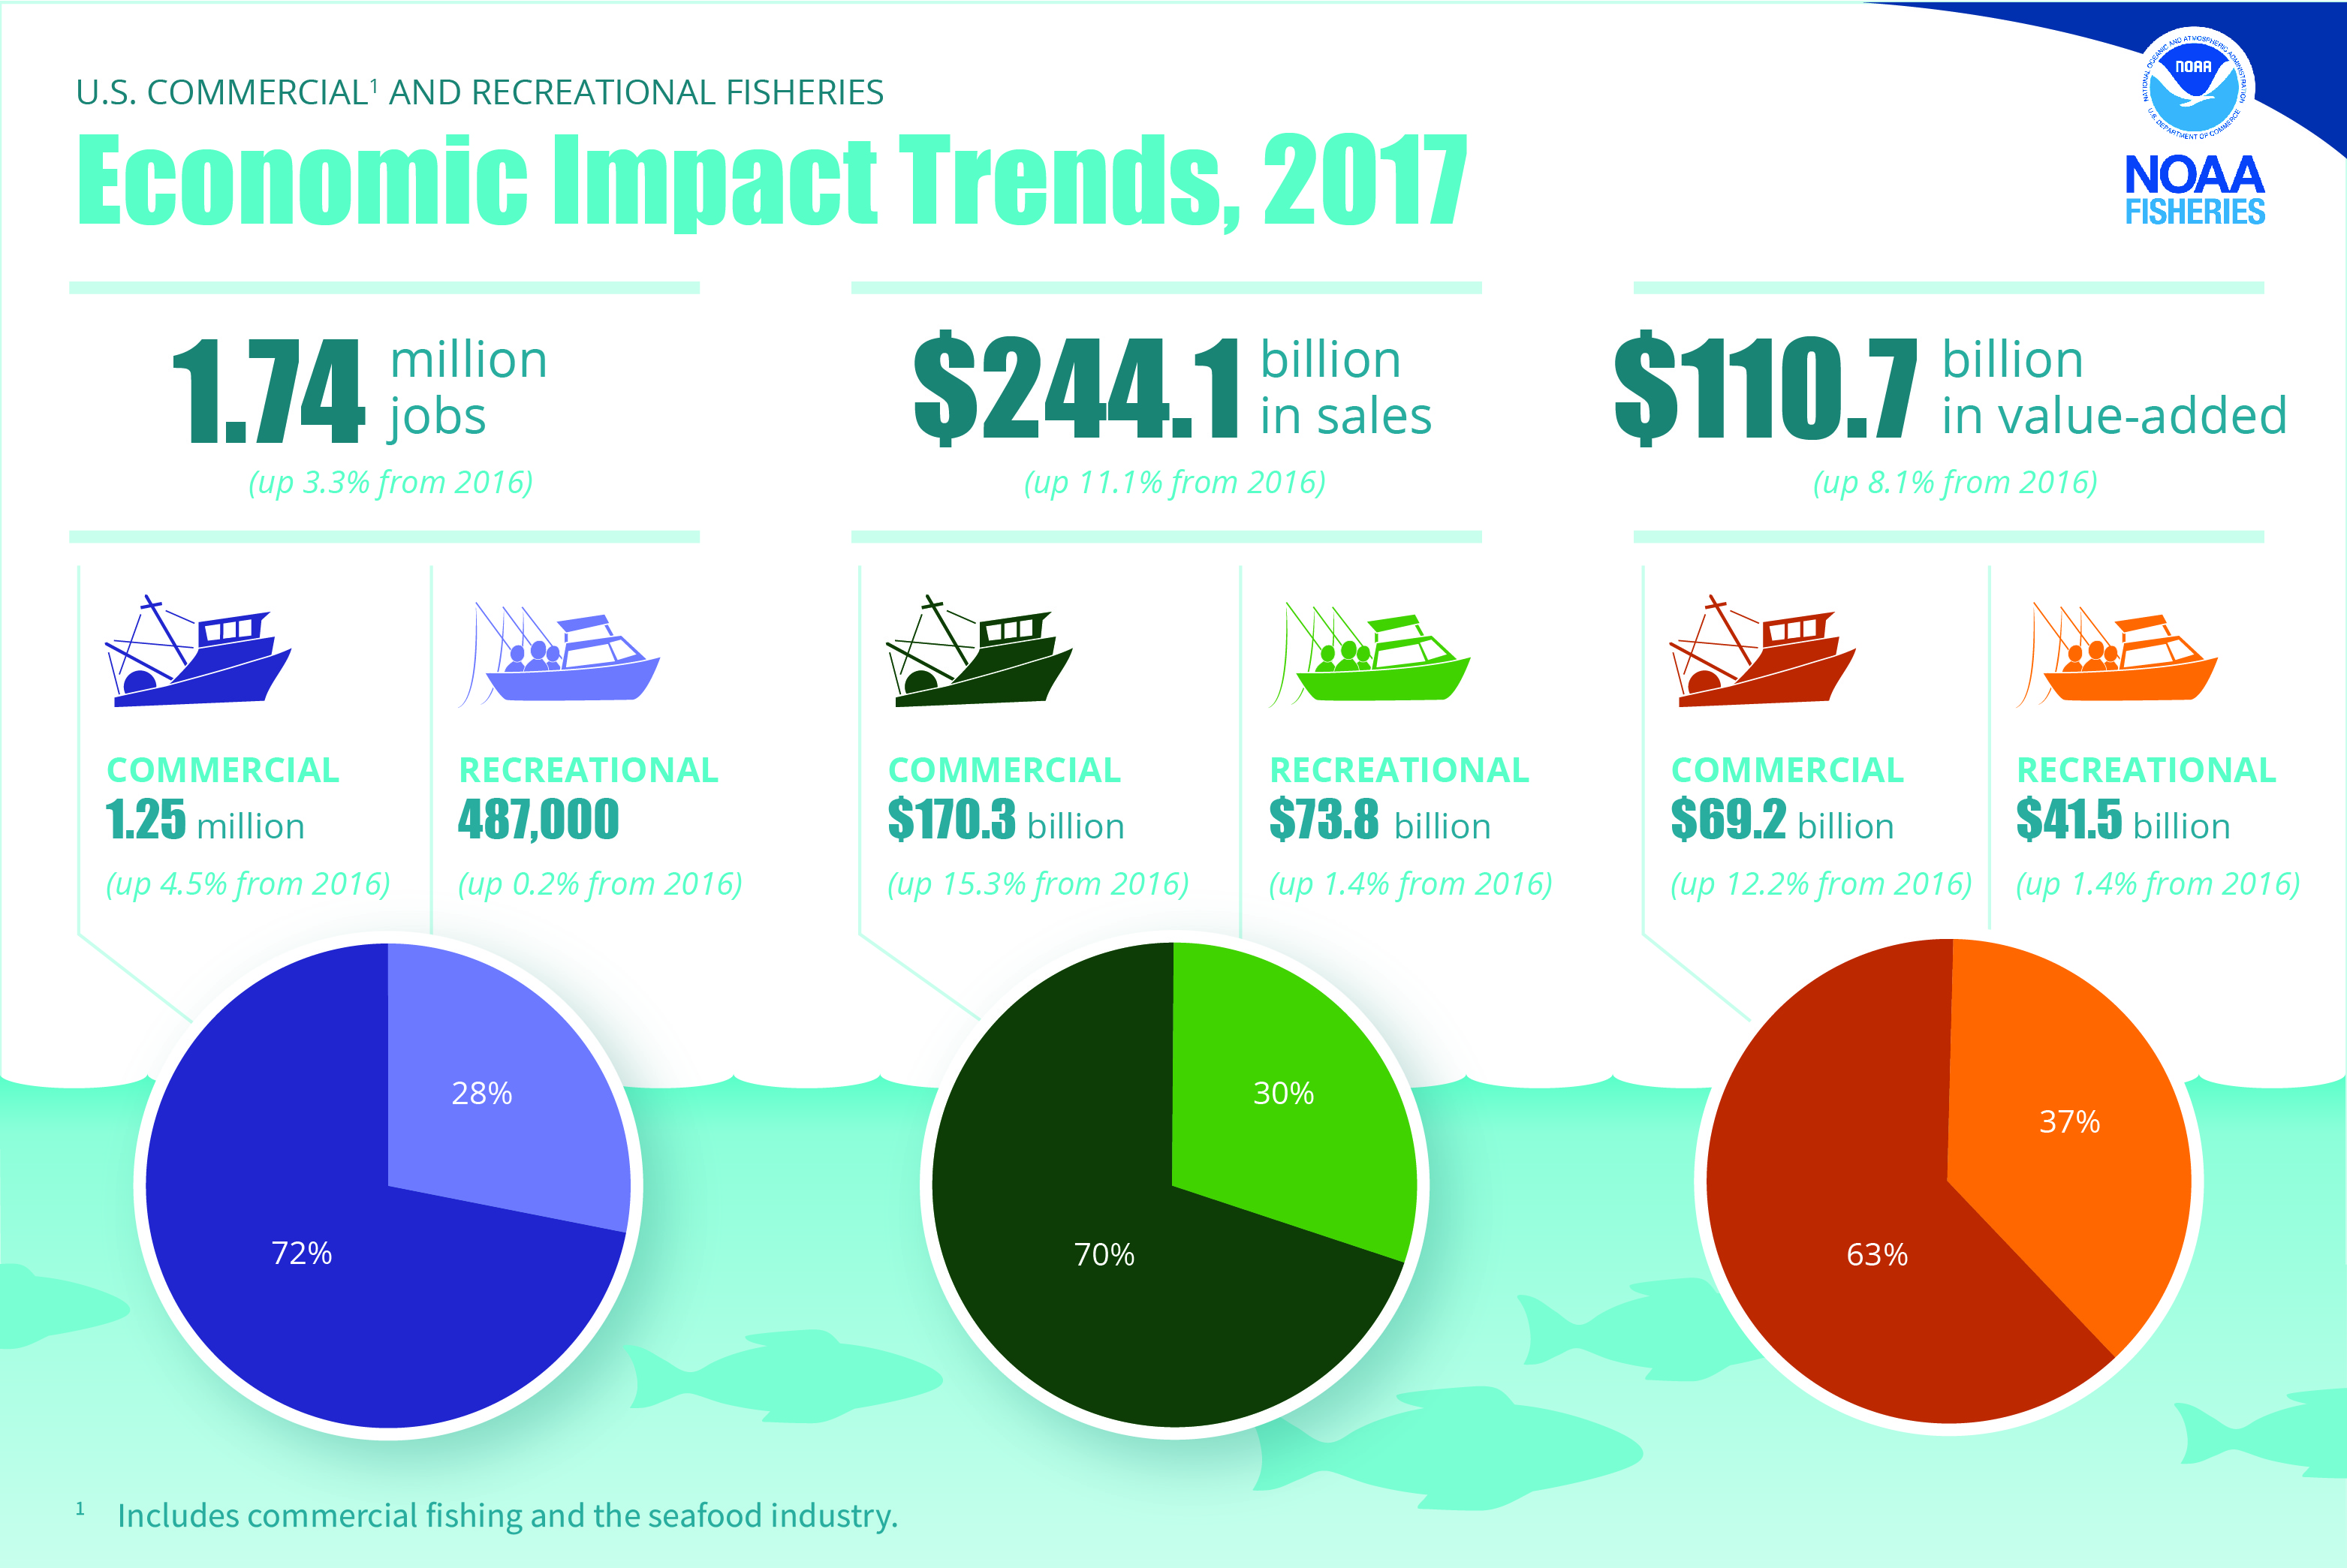 NOAA's annual Fisheries Economics of the U.S. report provides an update on the economic performance of U.S. fisheries.